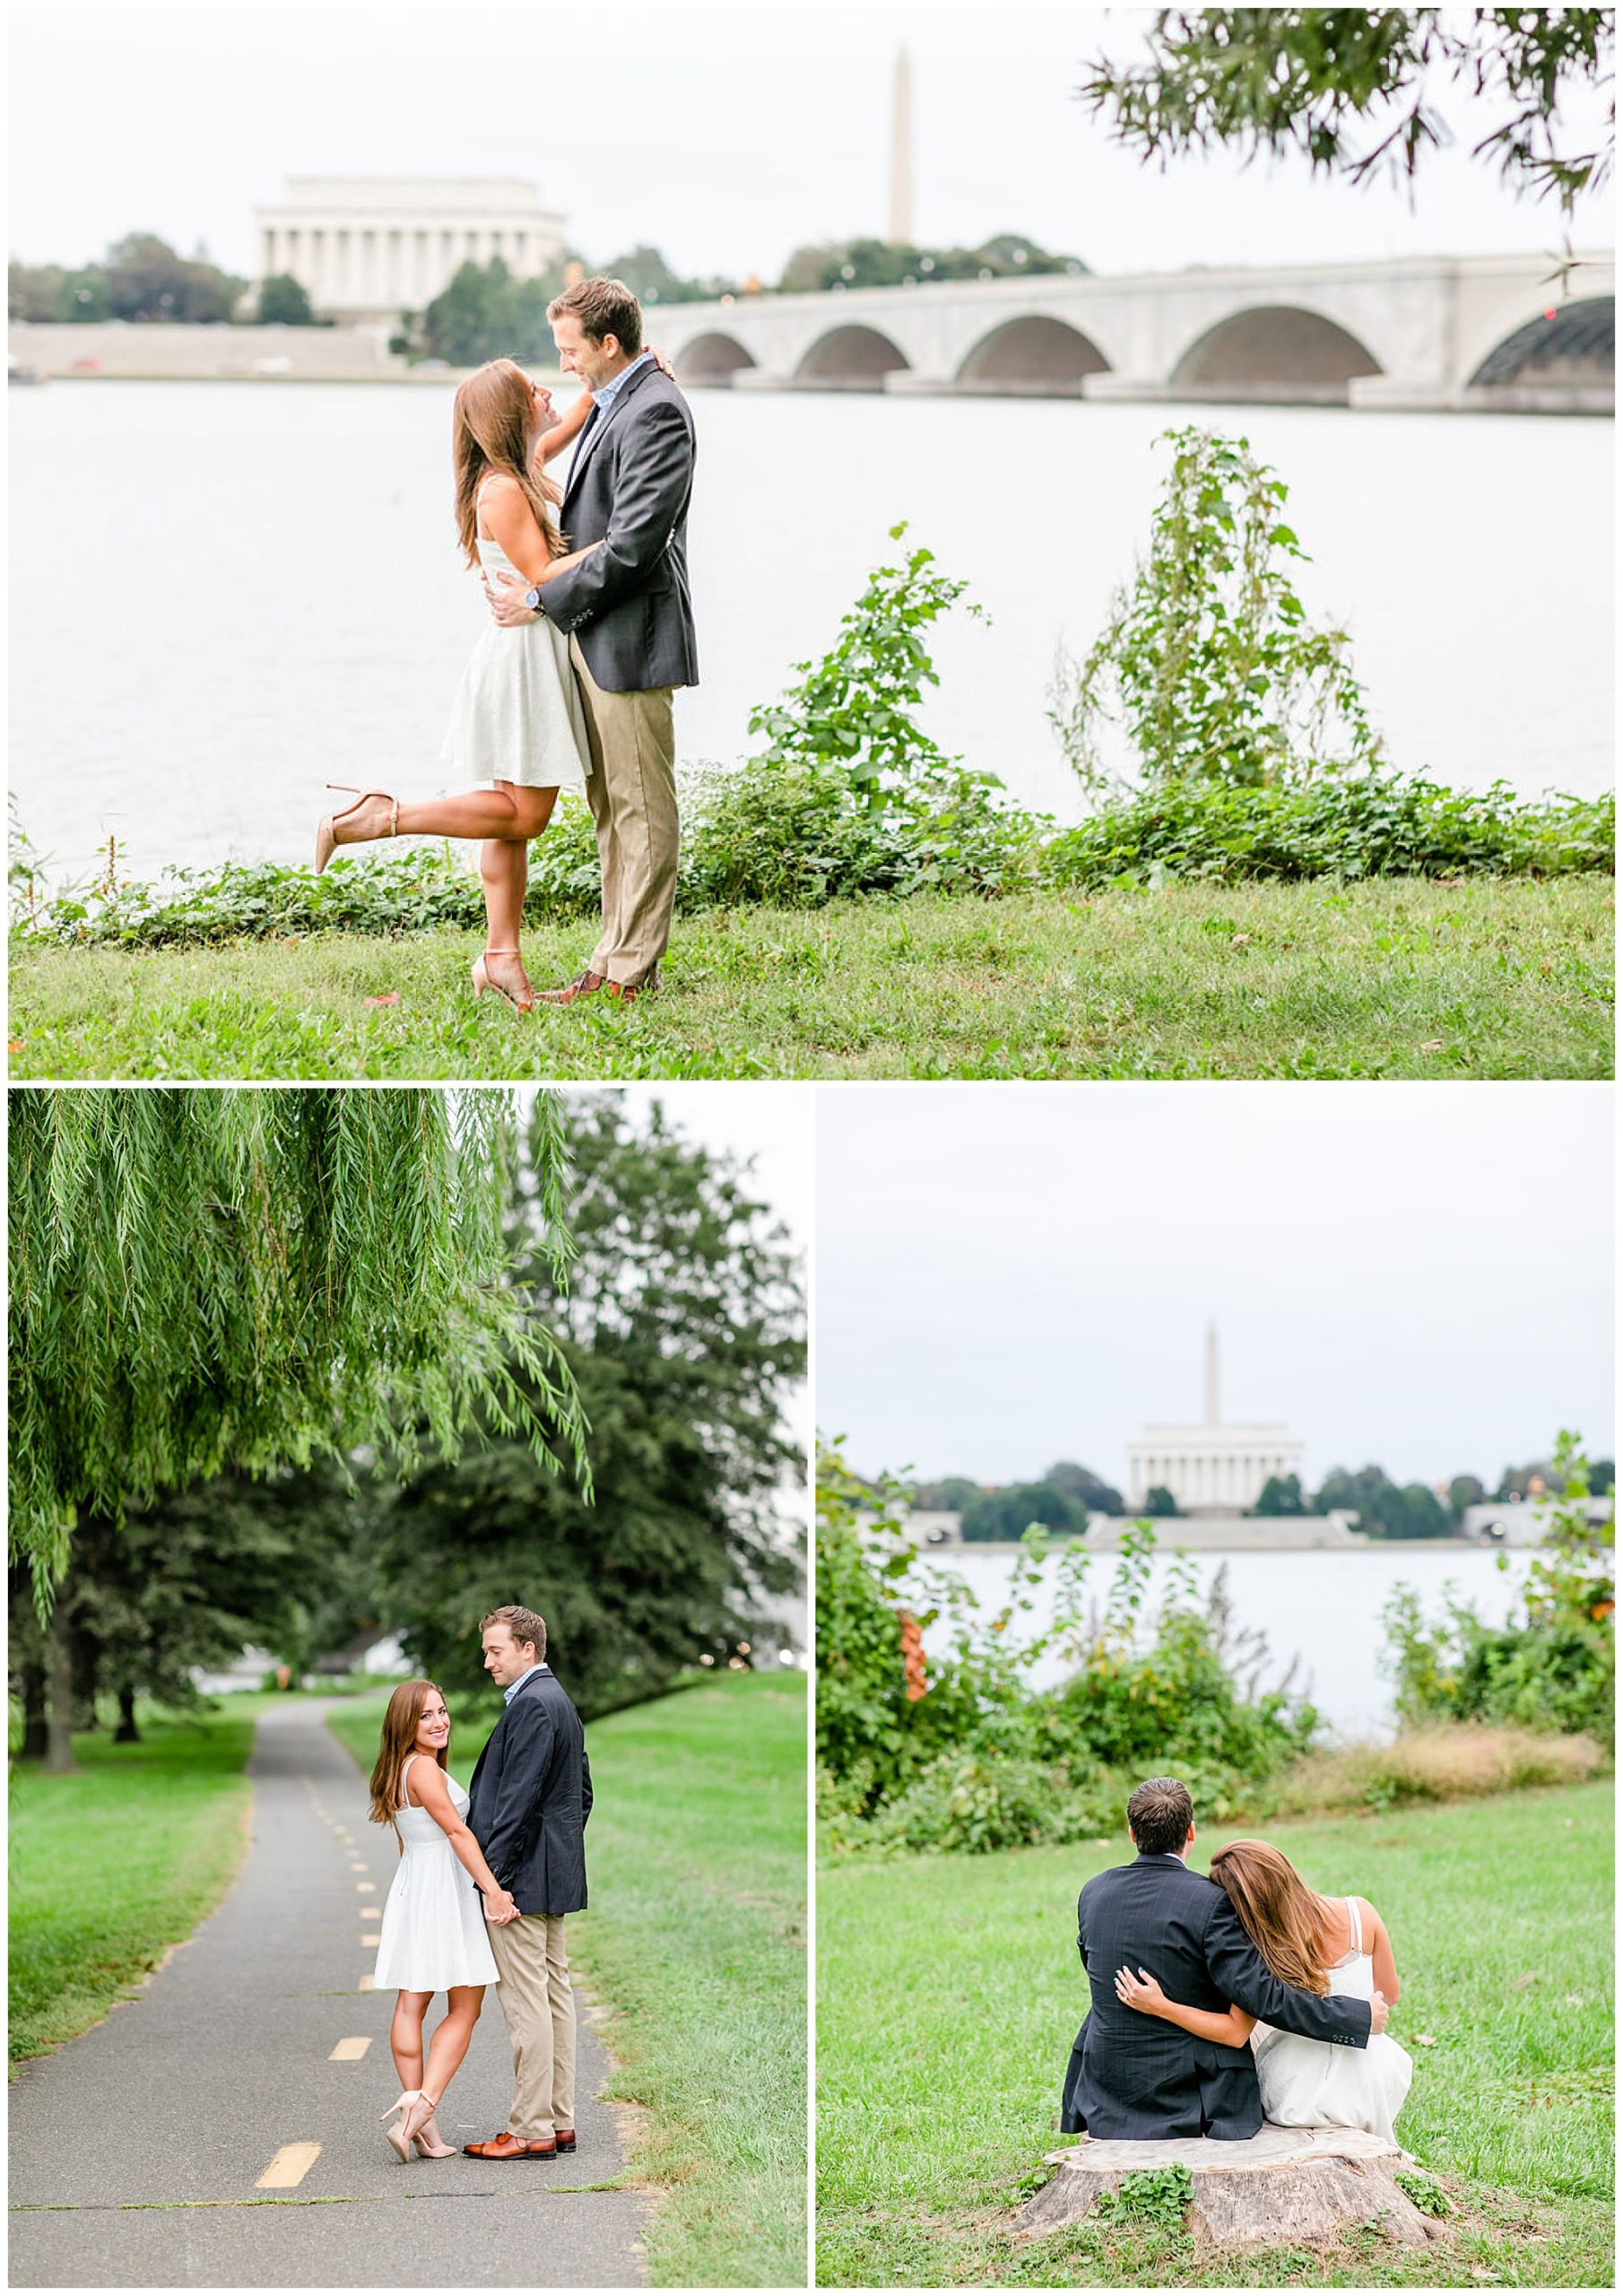 GW Parkway engagement photos, Roosevelt Island engagement photos, Mt. Vernon Trail engagement photos, Arlington engagement photos, DC engagement photos, waterfront engagement photos, autumn engagement photos, natural light engagement photos, Rachel E.H. Photography, couple almost kissing in front of water, couple sitting on tree stump